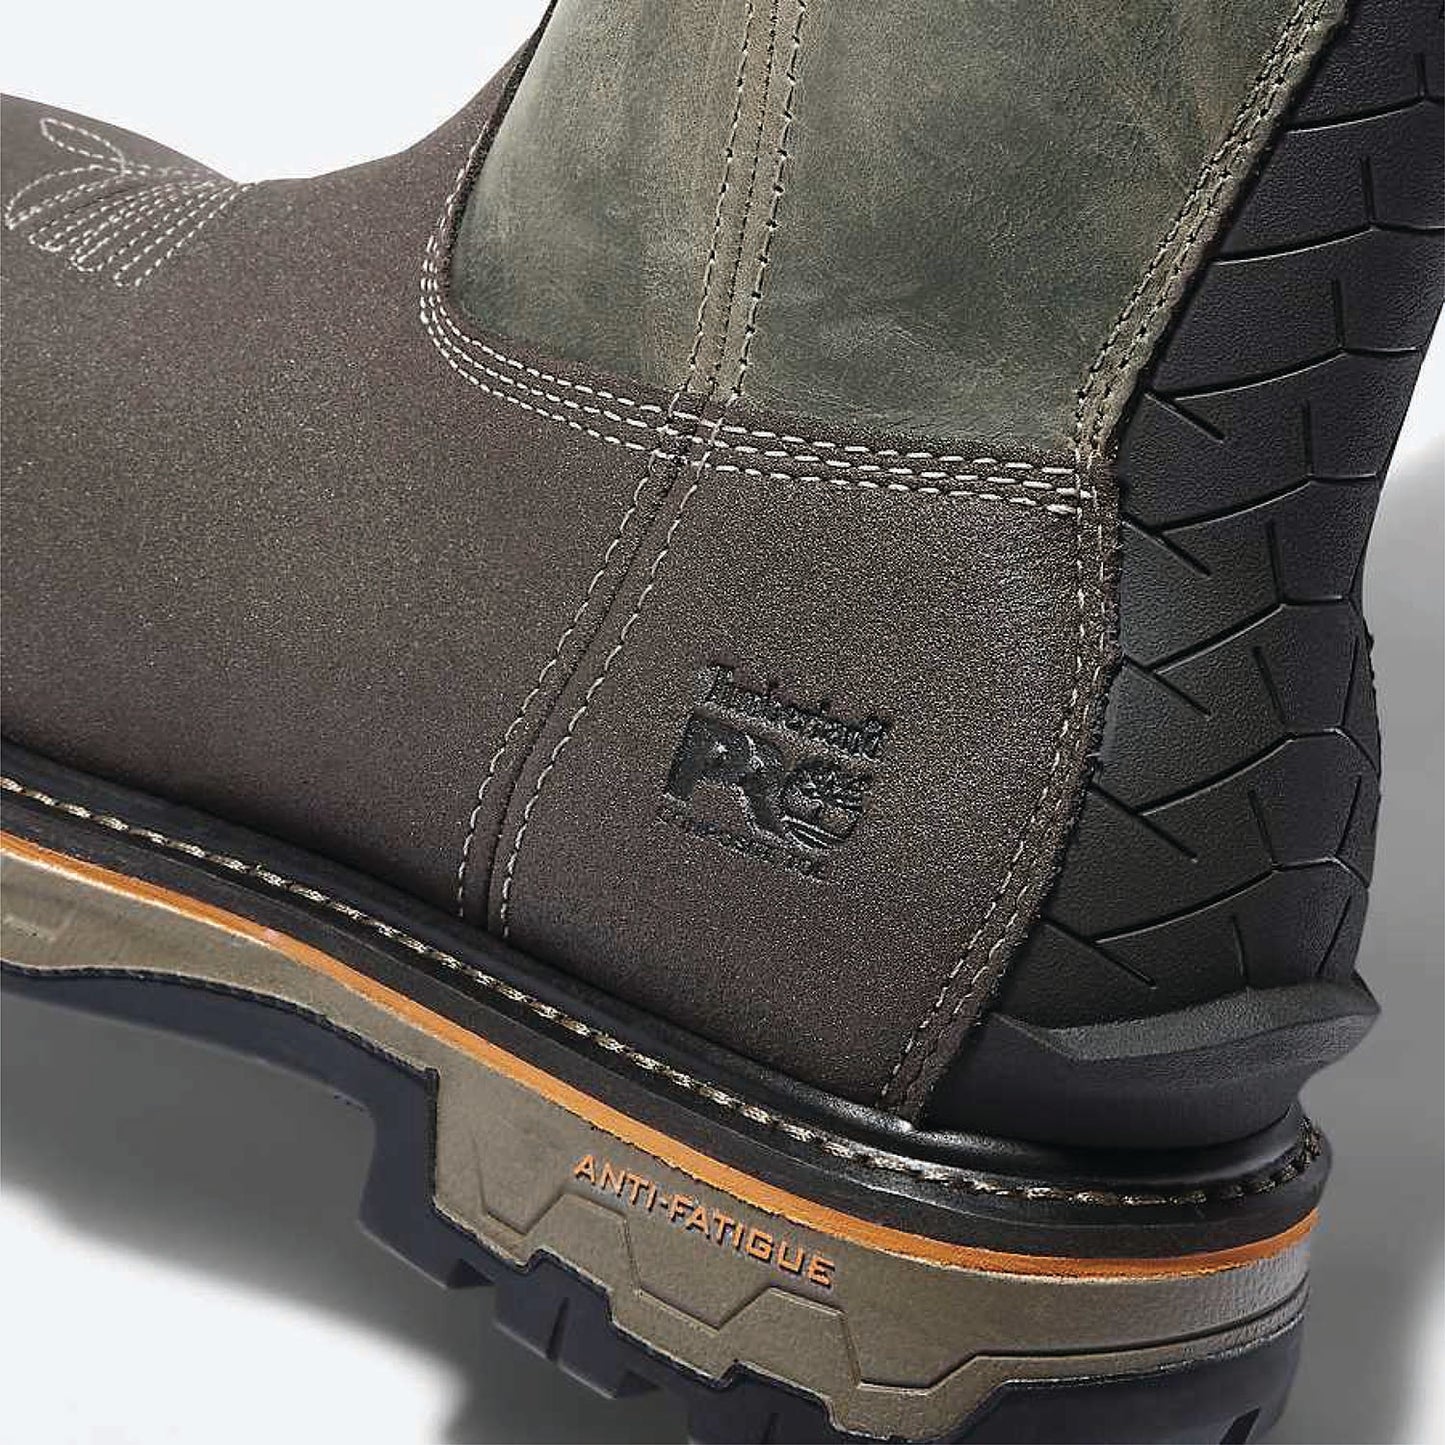 TIMBERLAND PRO® TRUE GRIT PULL ON COMPOSITE TOE WATERPROOF WORK BOOT - MEN'S - TB0A2297214 - DETAIL SHOT